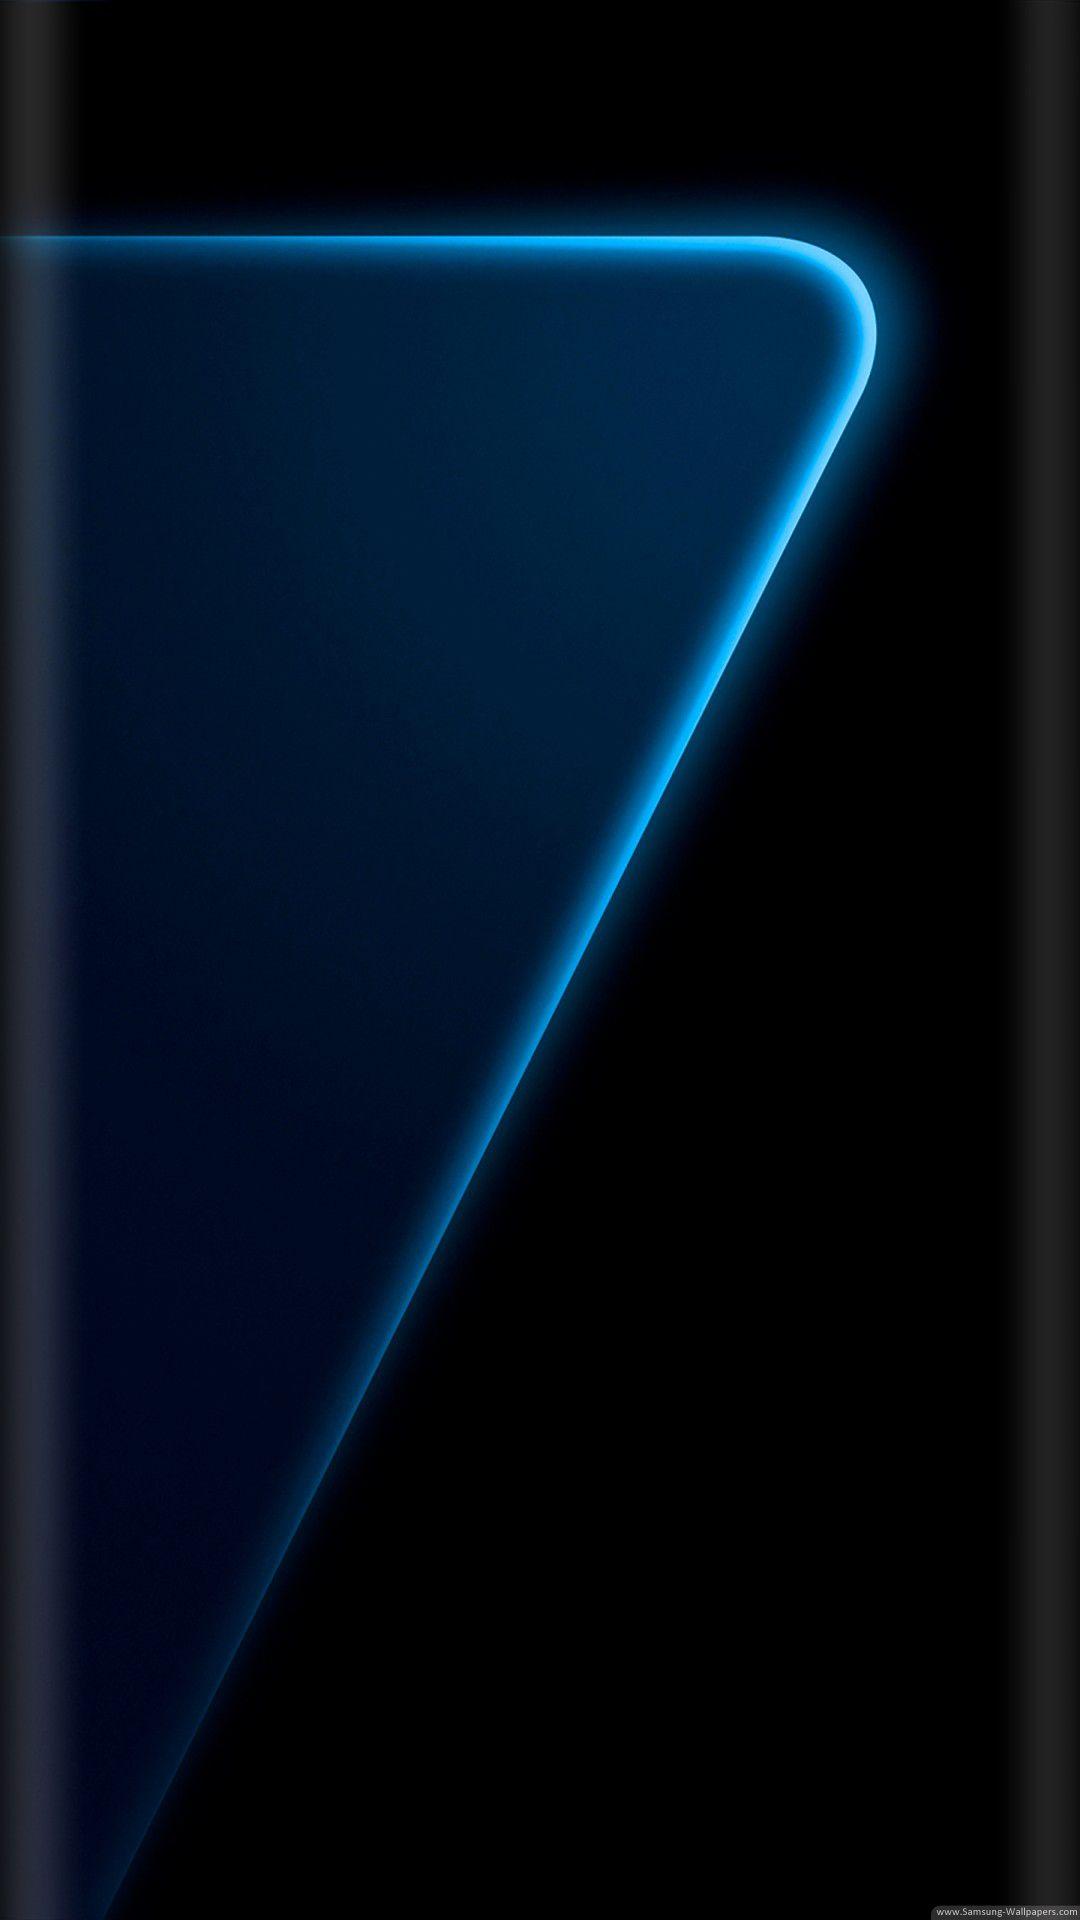 Samsung Galaxy S7 Edge Official Curved Stock 1080x1920 Wallpaper